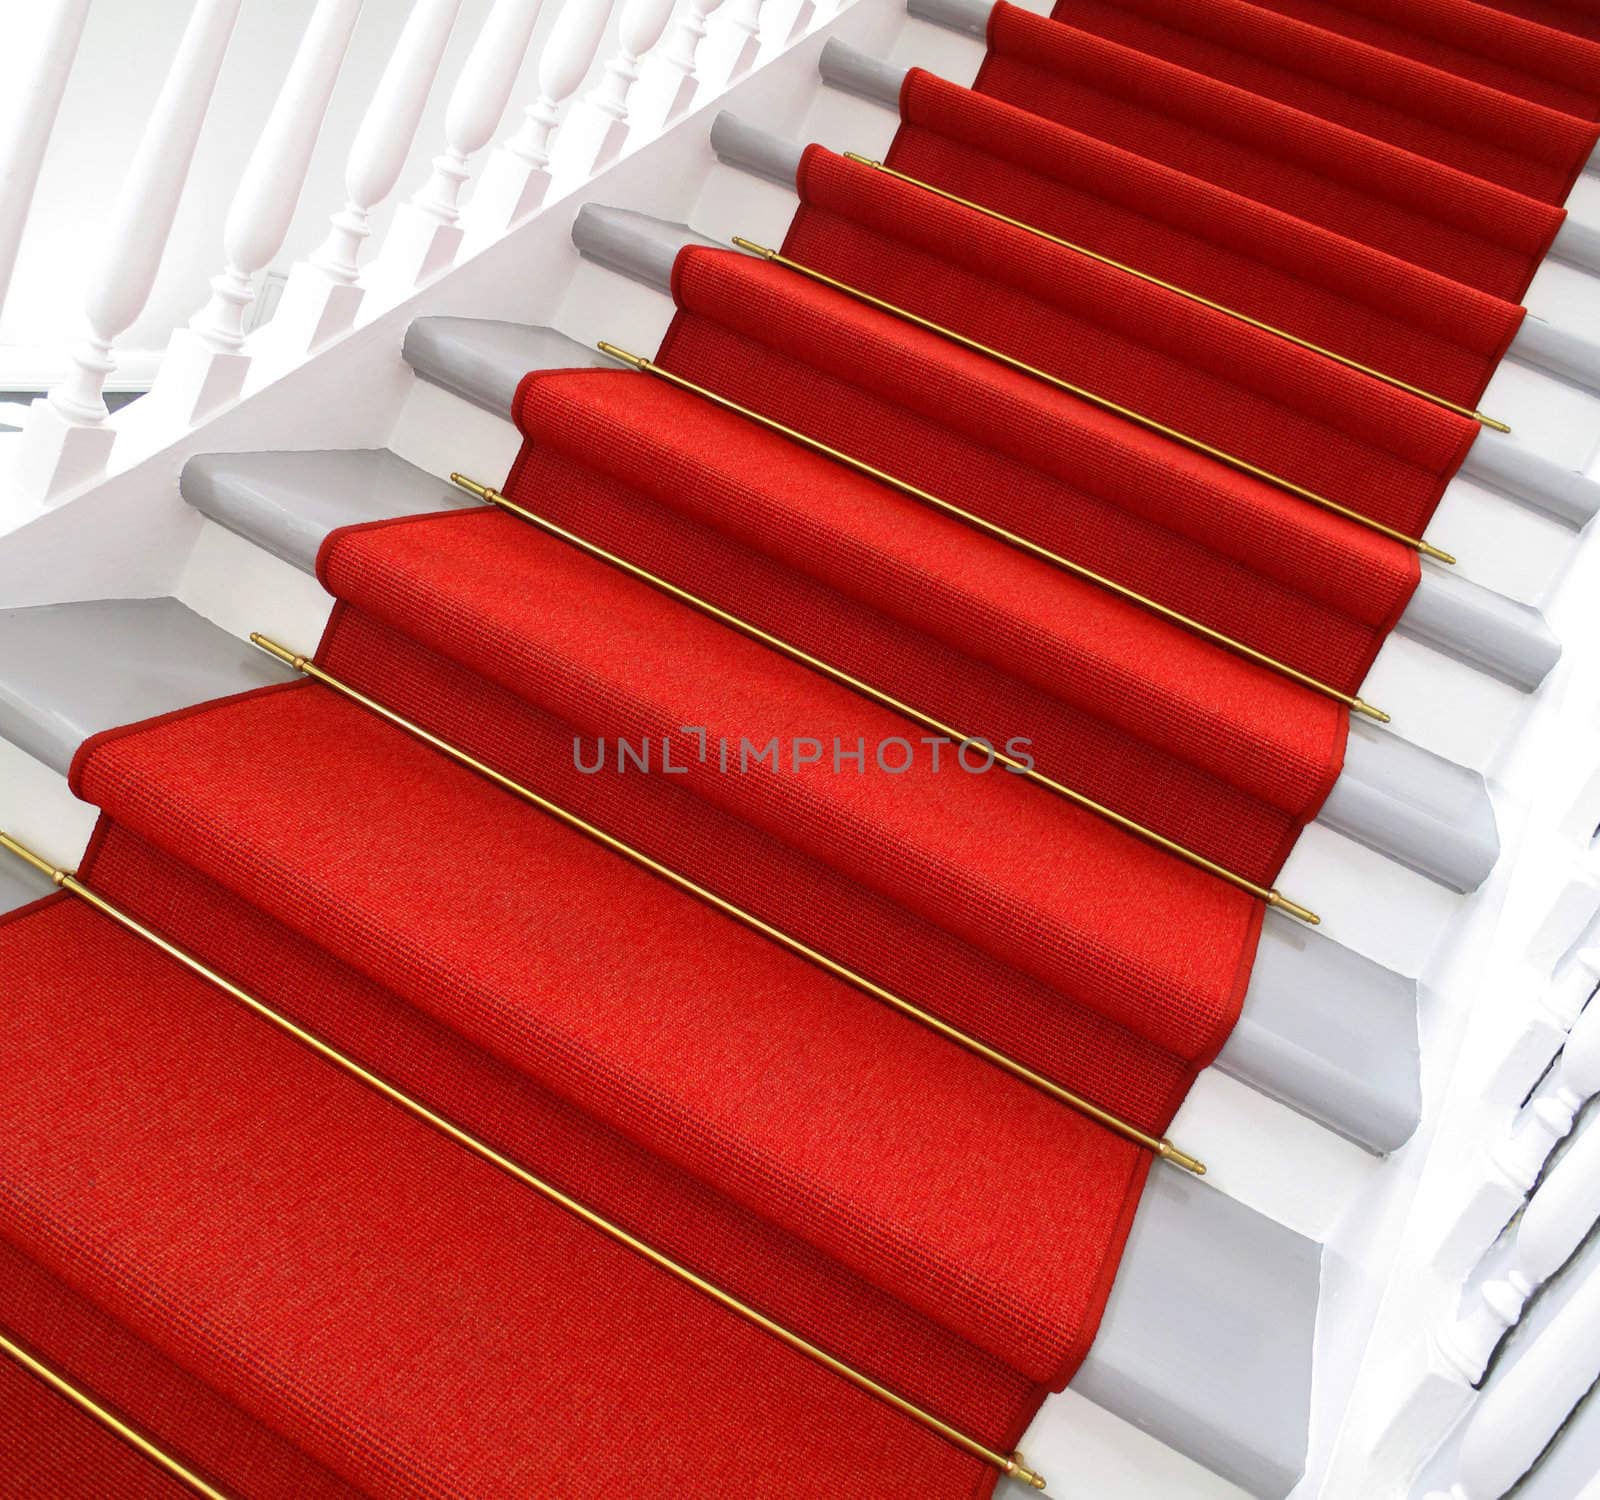 Nice old staircase with red carpet.